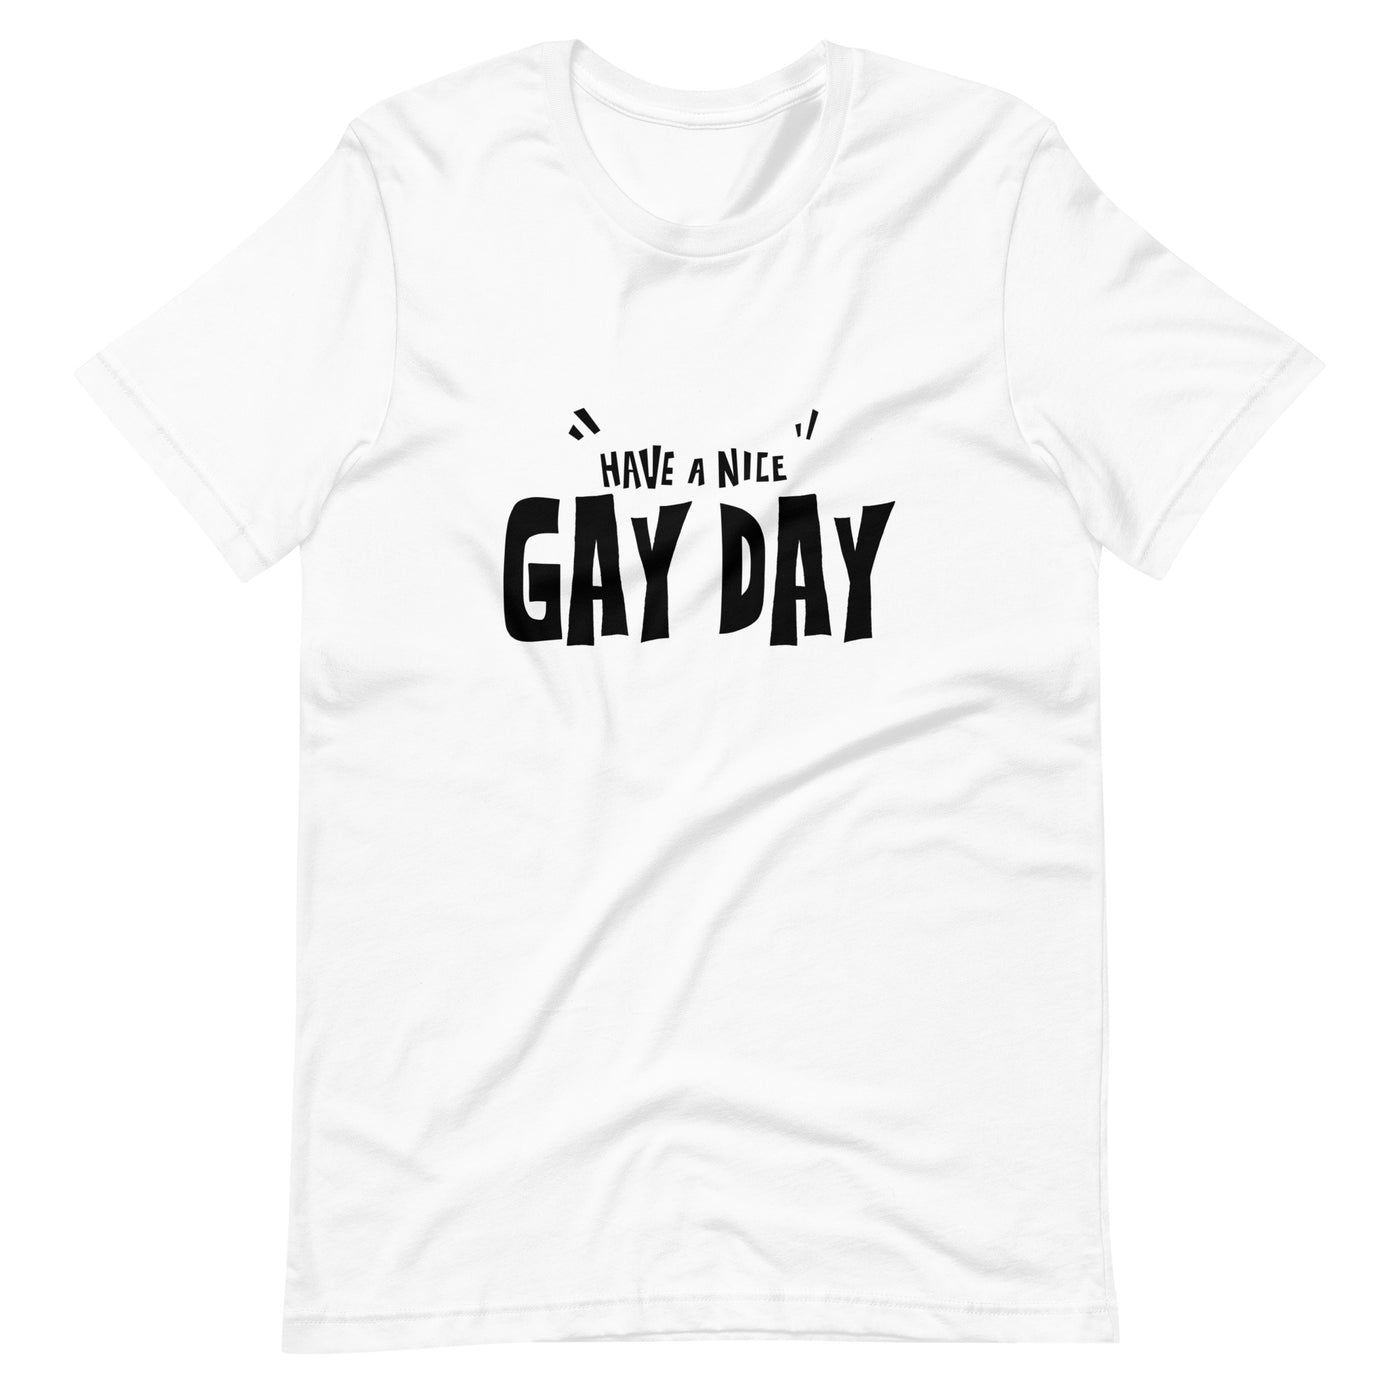 Pride Clothes - Live Out Loud Have a Nice Gay Day Pride Things TShirt - White